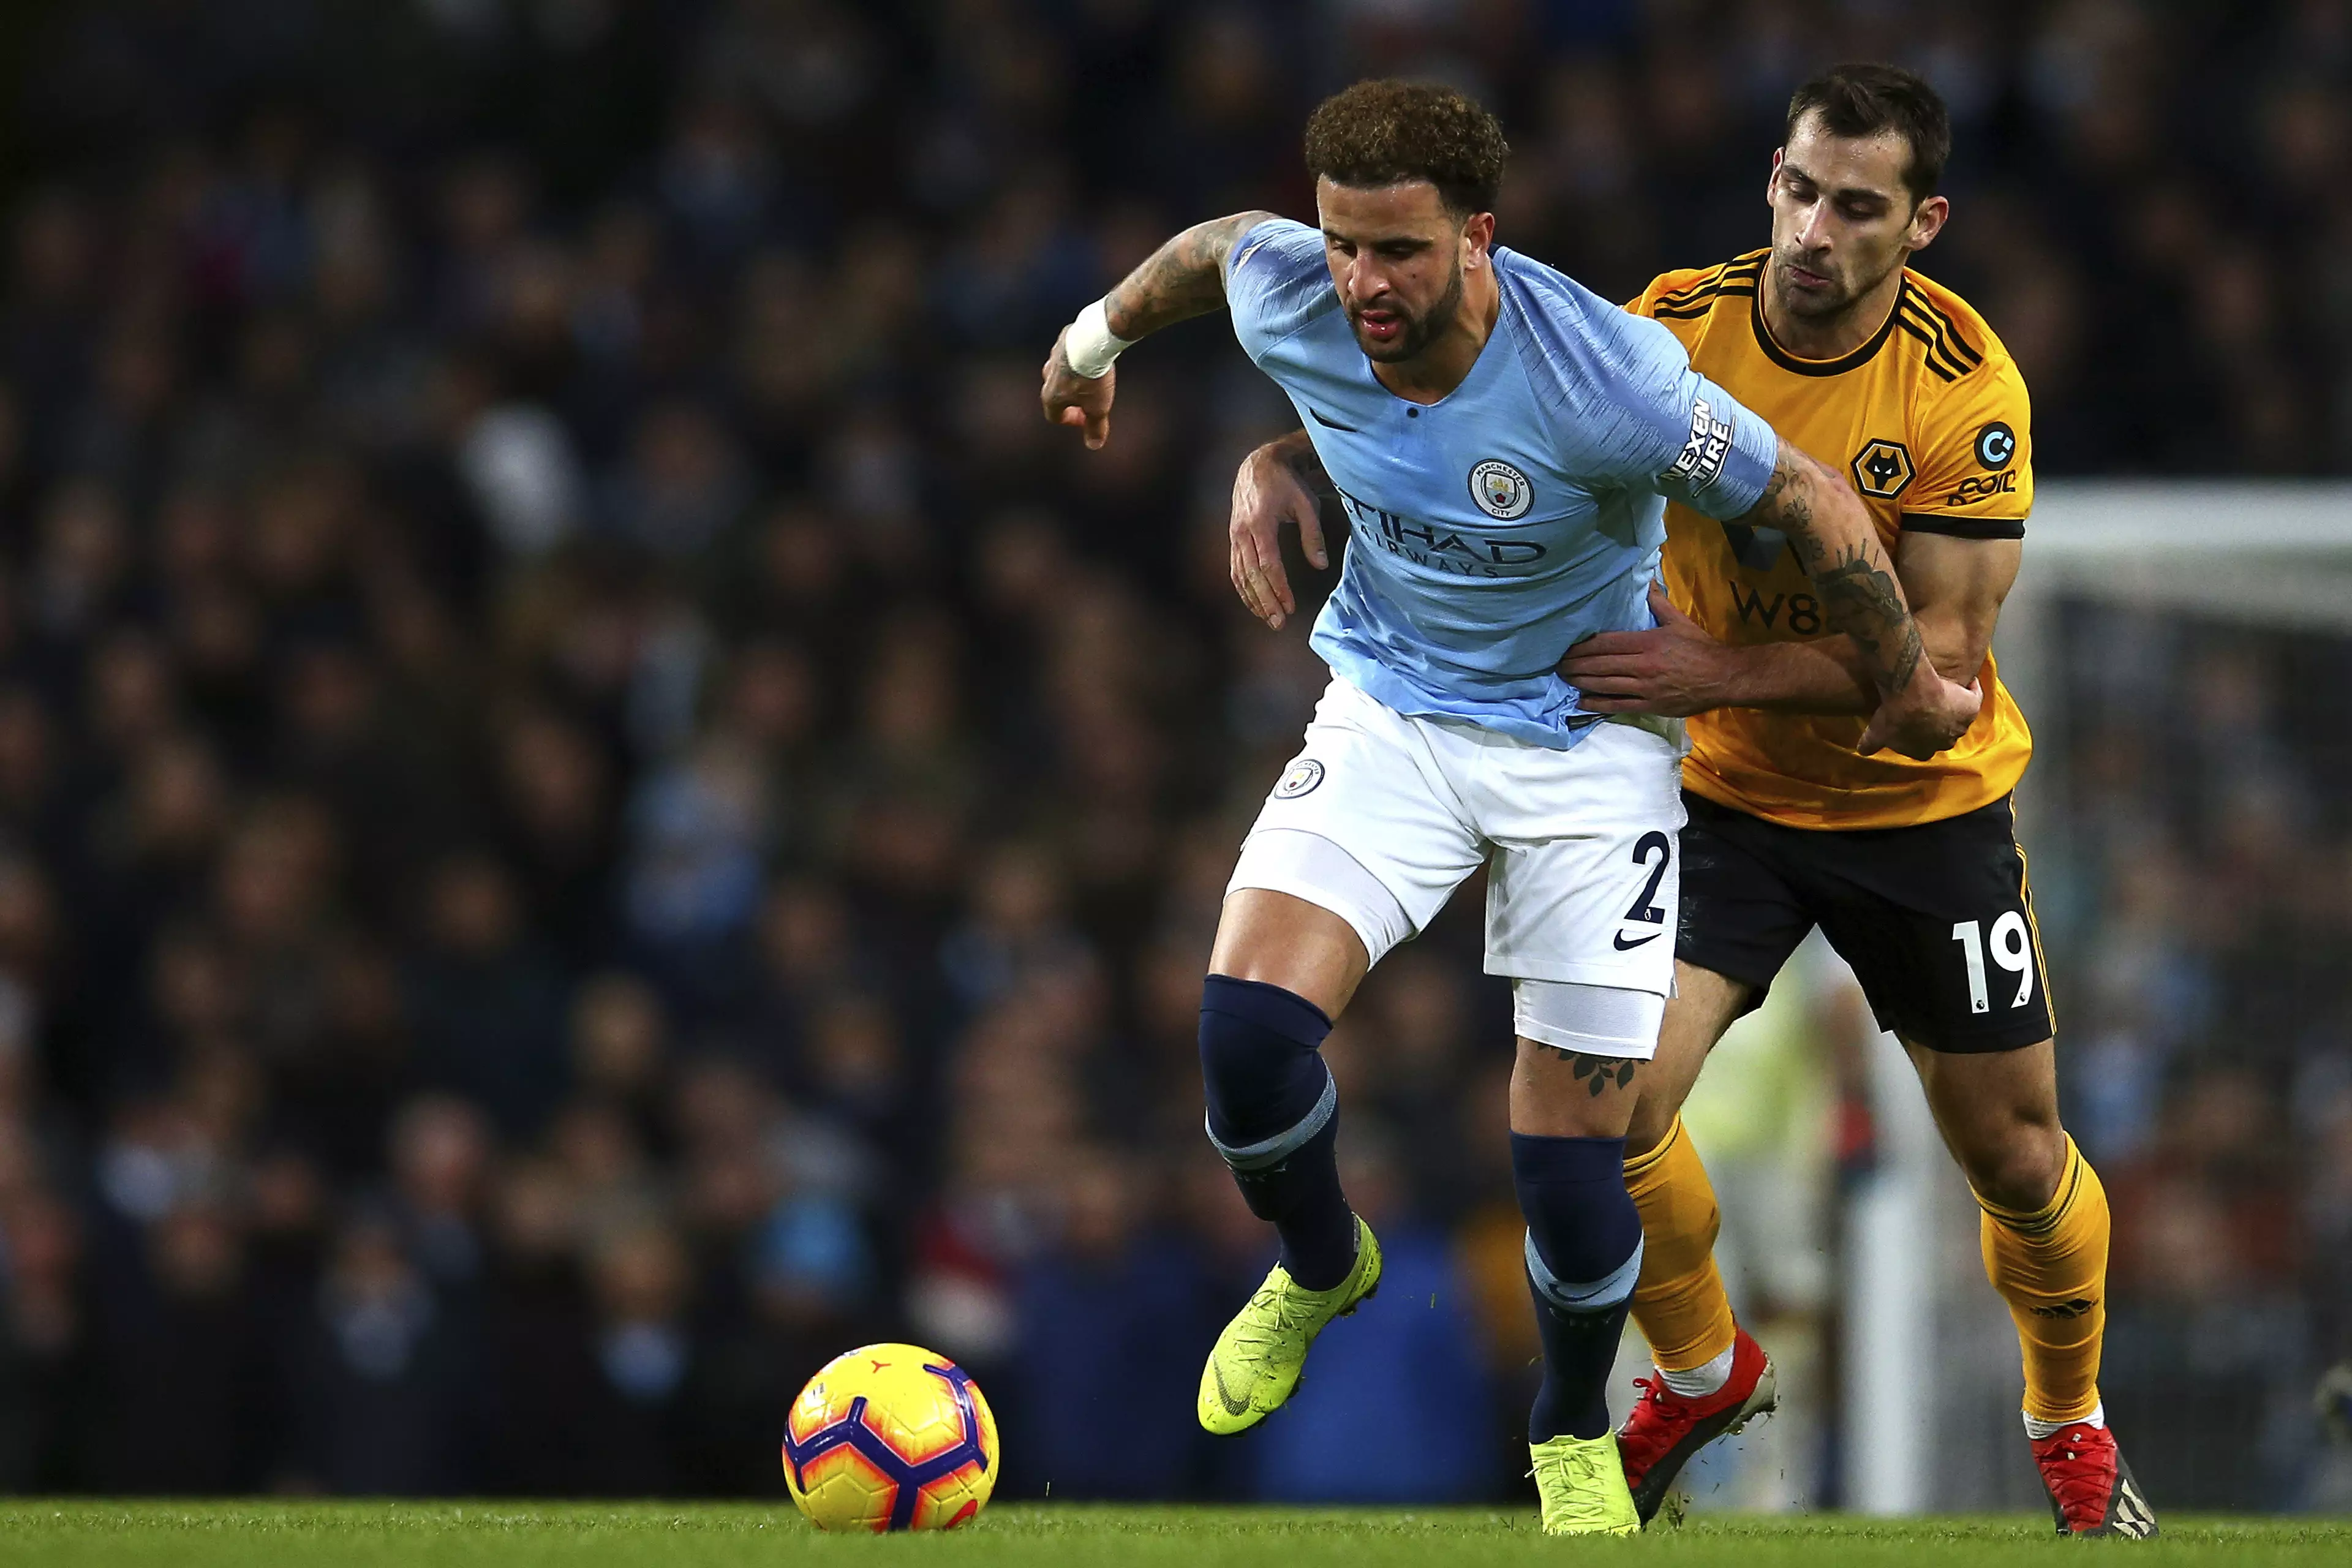 Kyle Walker's form for City hasn't been great recently. Image: PA Images